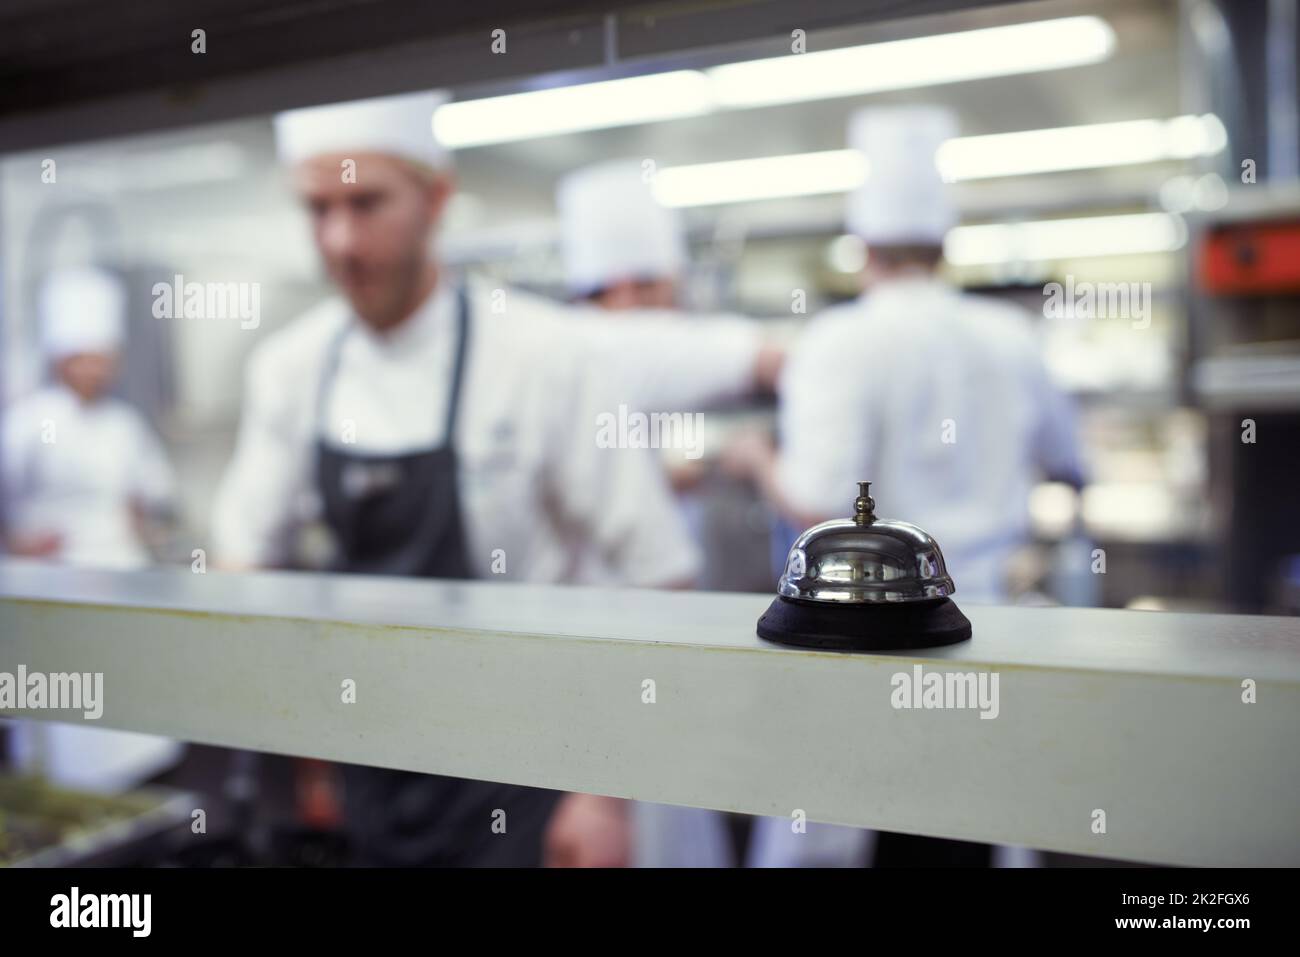 Service. Shot of chefs preparing a meal service in a professional kitchen. Stock Photo